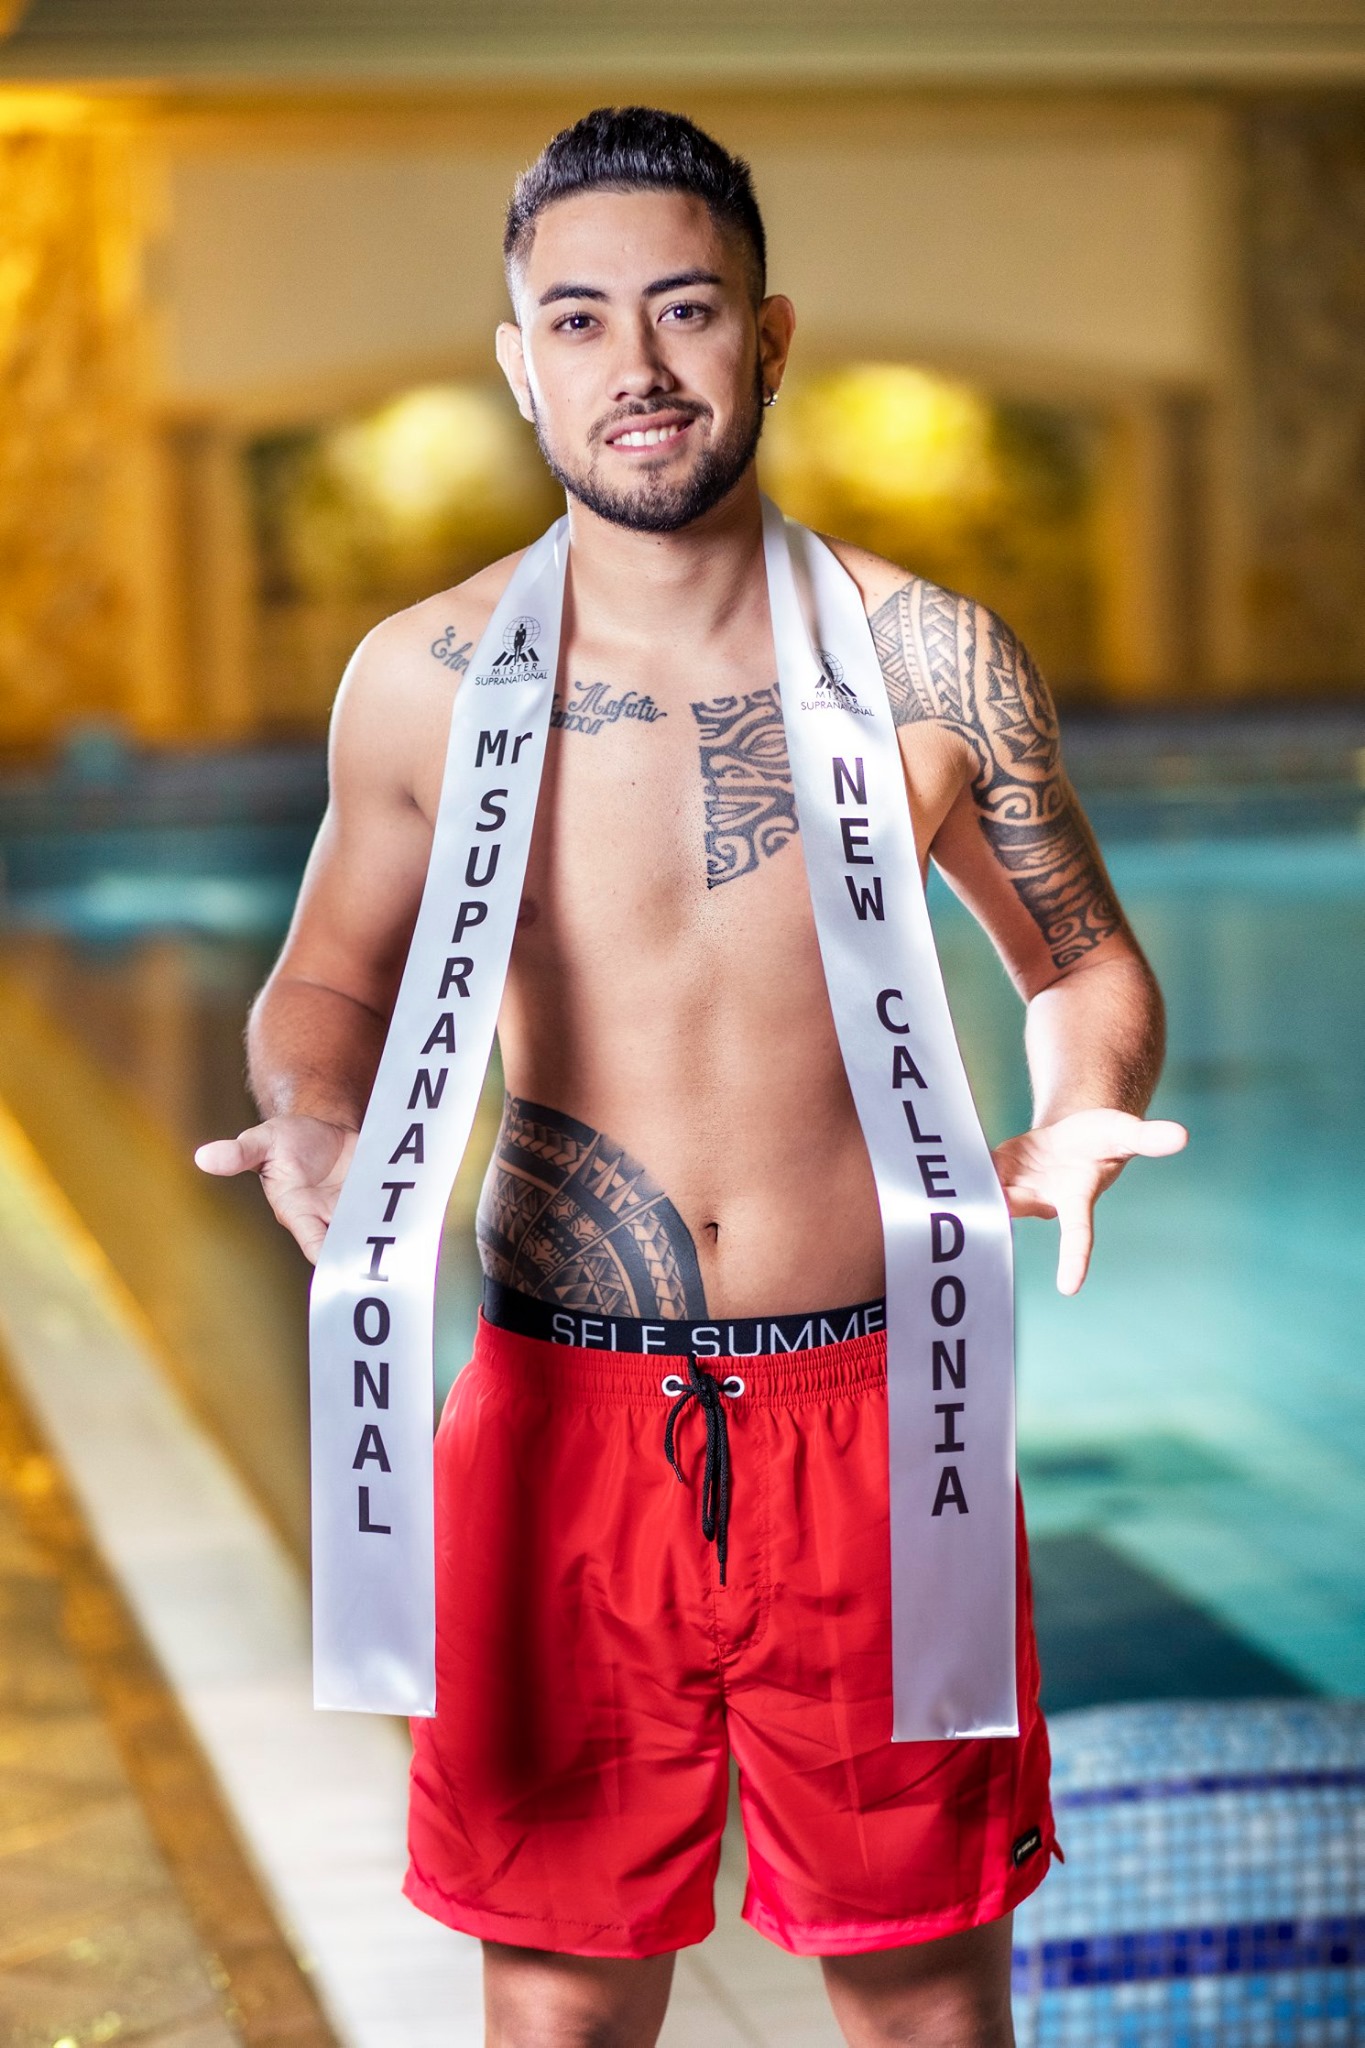 Mister Supranational 2019 Official Swimwear 00014